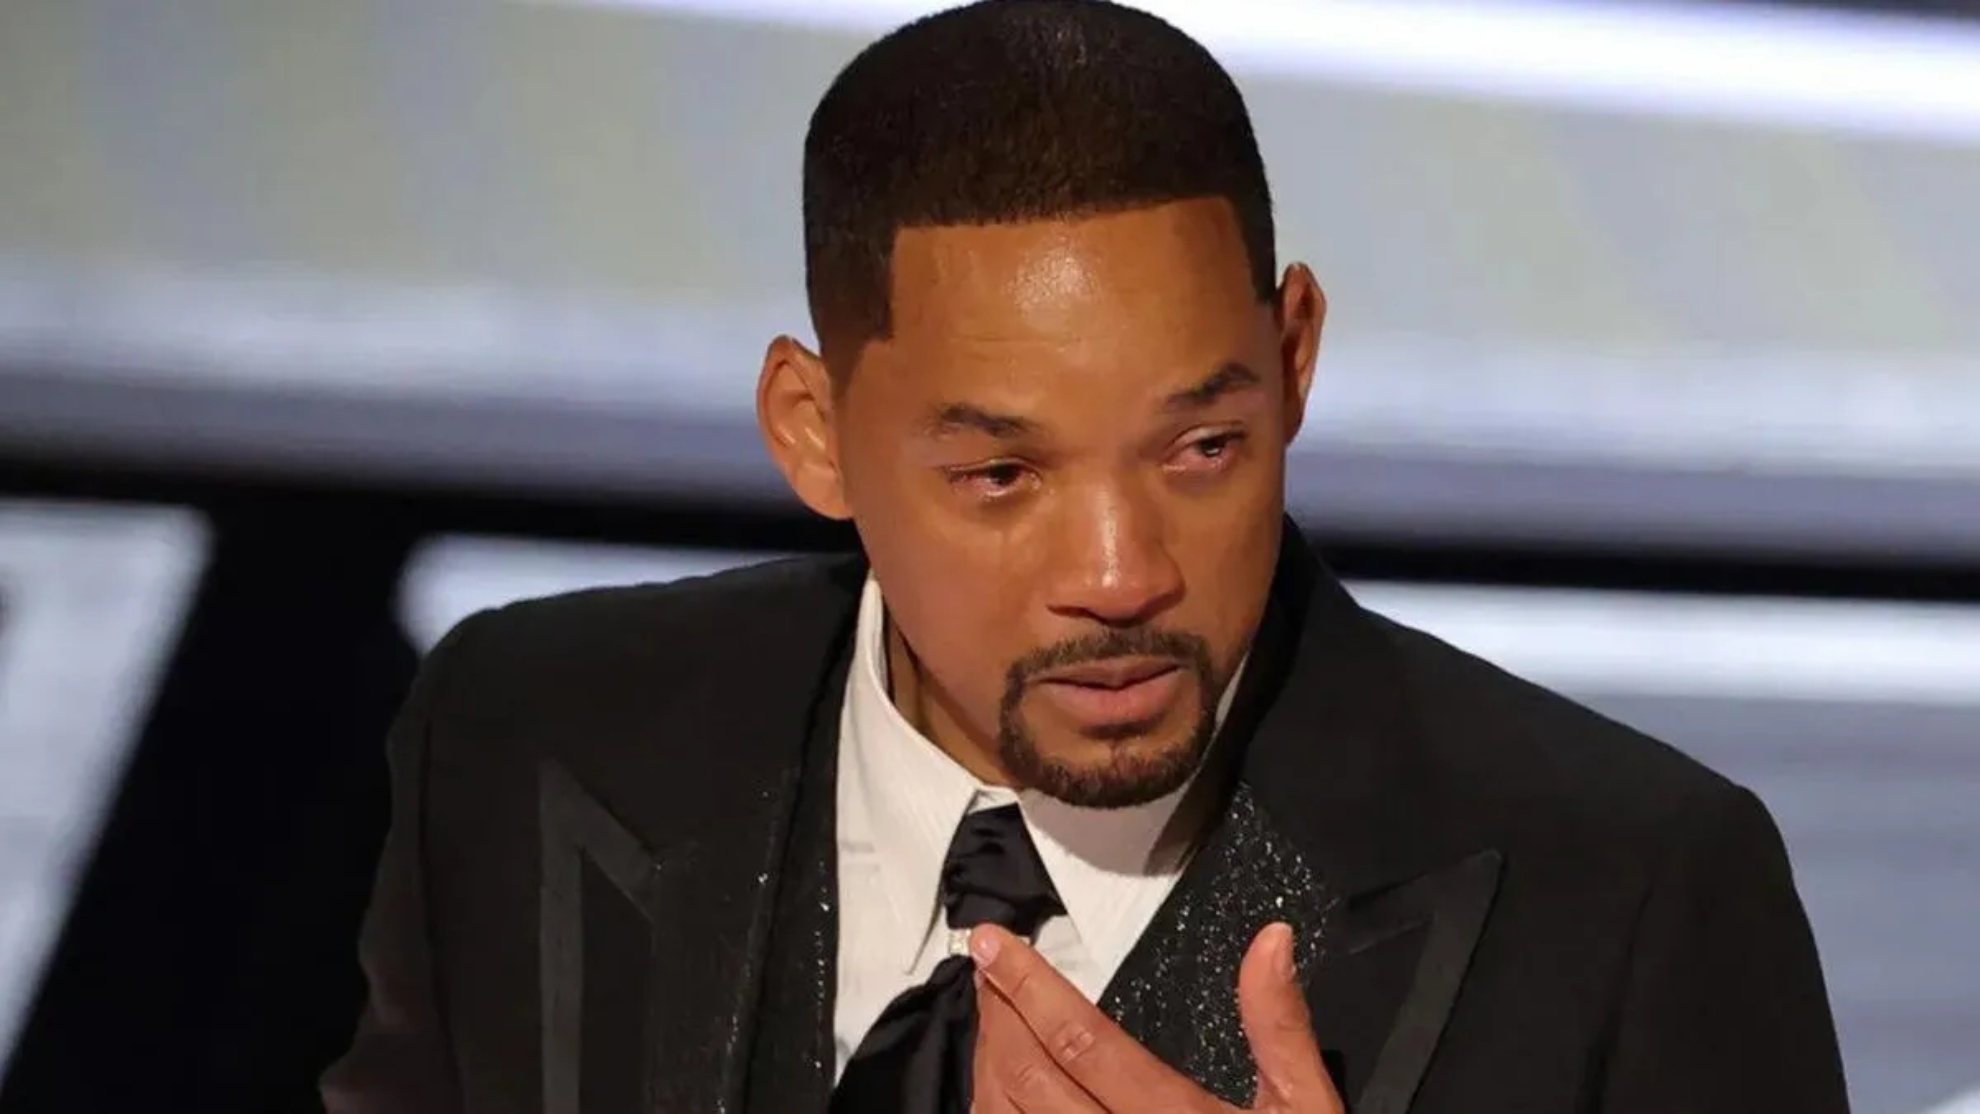 What Will Smith has lost since slapping Chris Rock at the Oscars | Marca